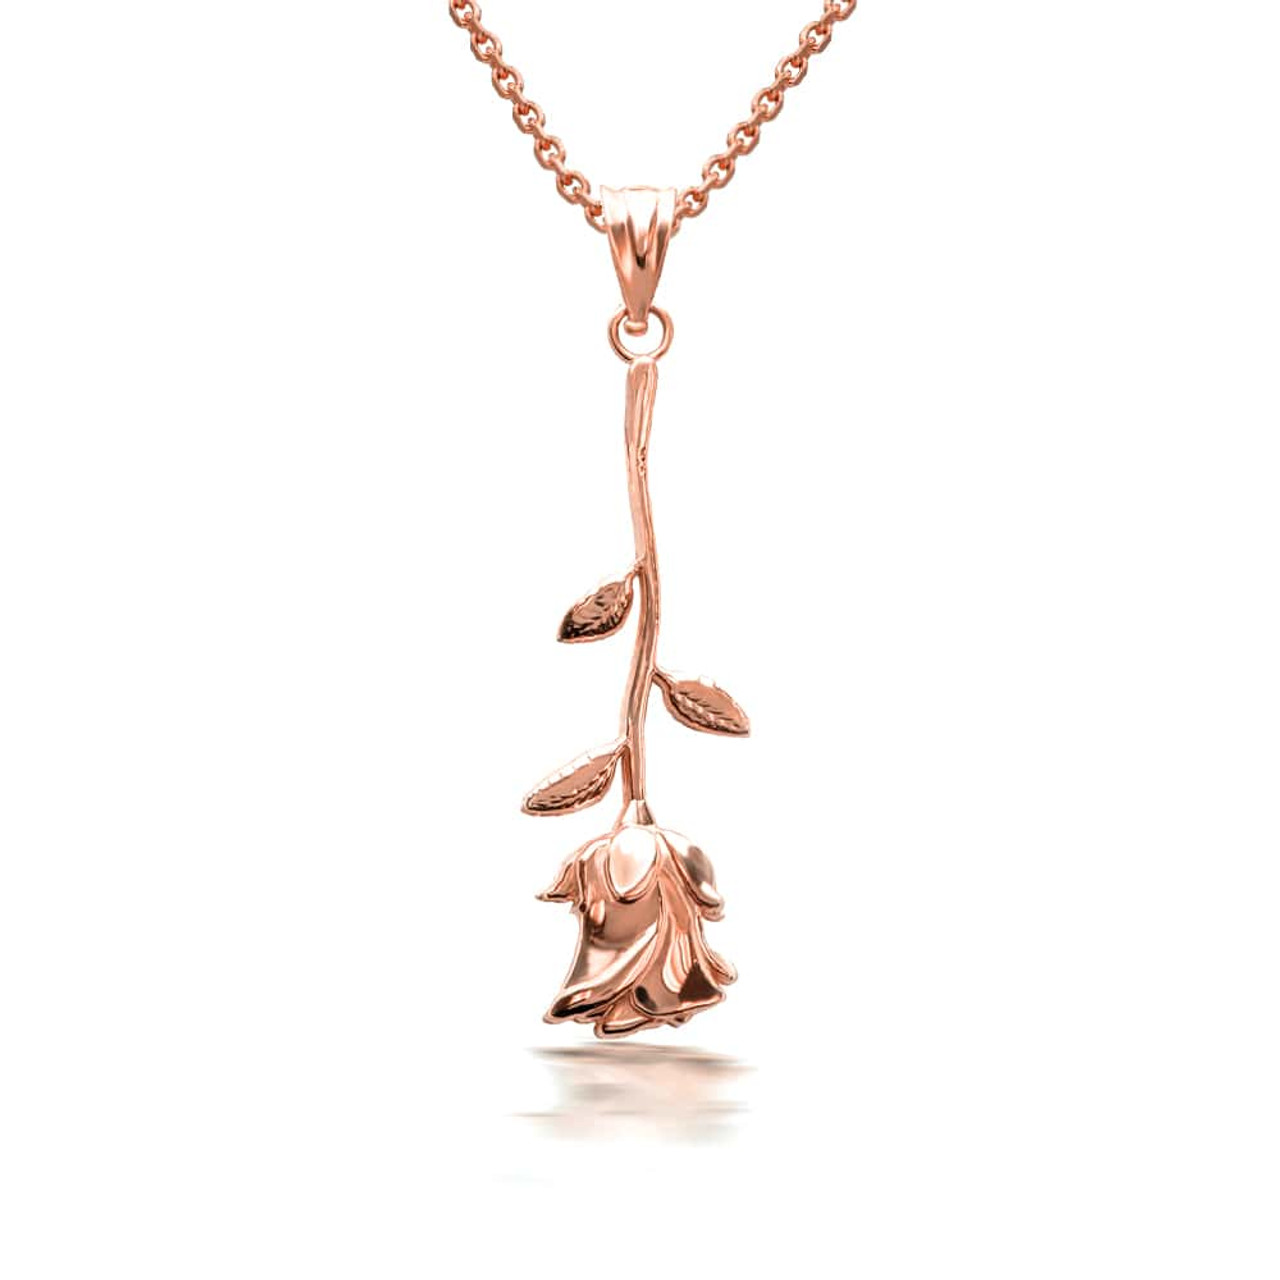 Solid 14k Yellow Gold 3D Small Angel with Open Arms Charm Pendant with Chain Necklace 